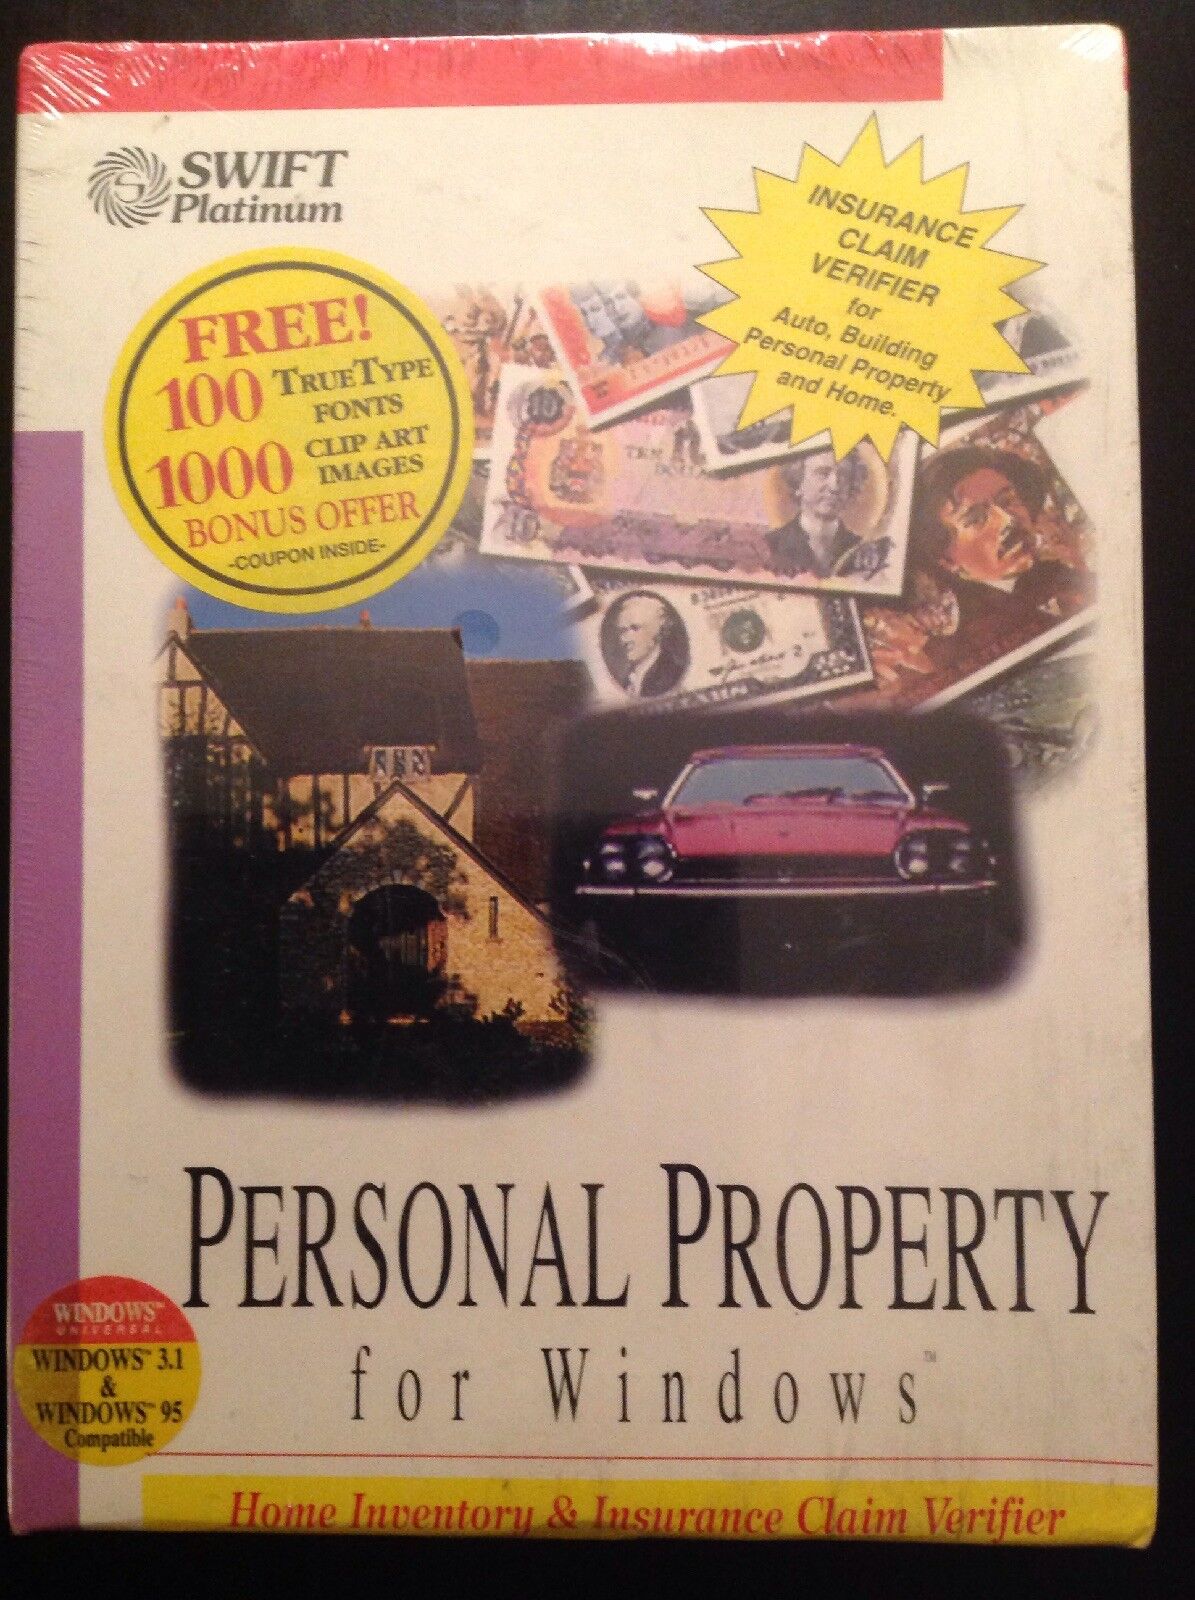 VINTAGE 1994 SWIFT PLATINUM PERSONAL PROPERTY FOR WINDOWS 95 HOME INVENTORY